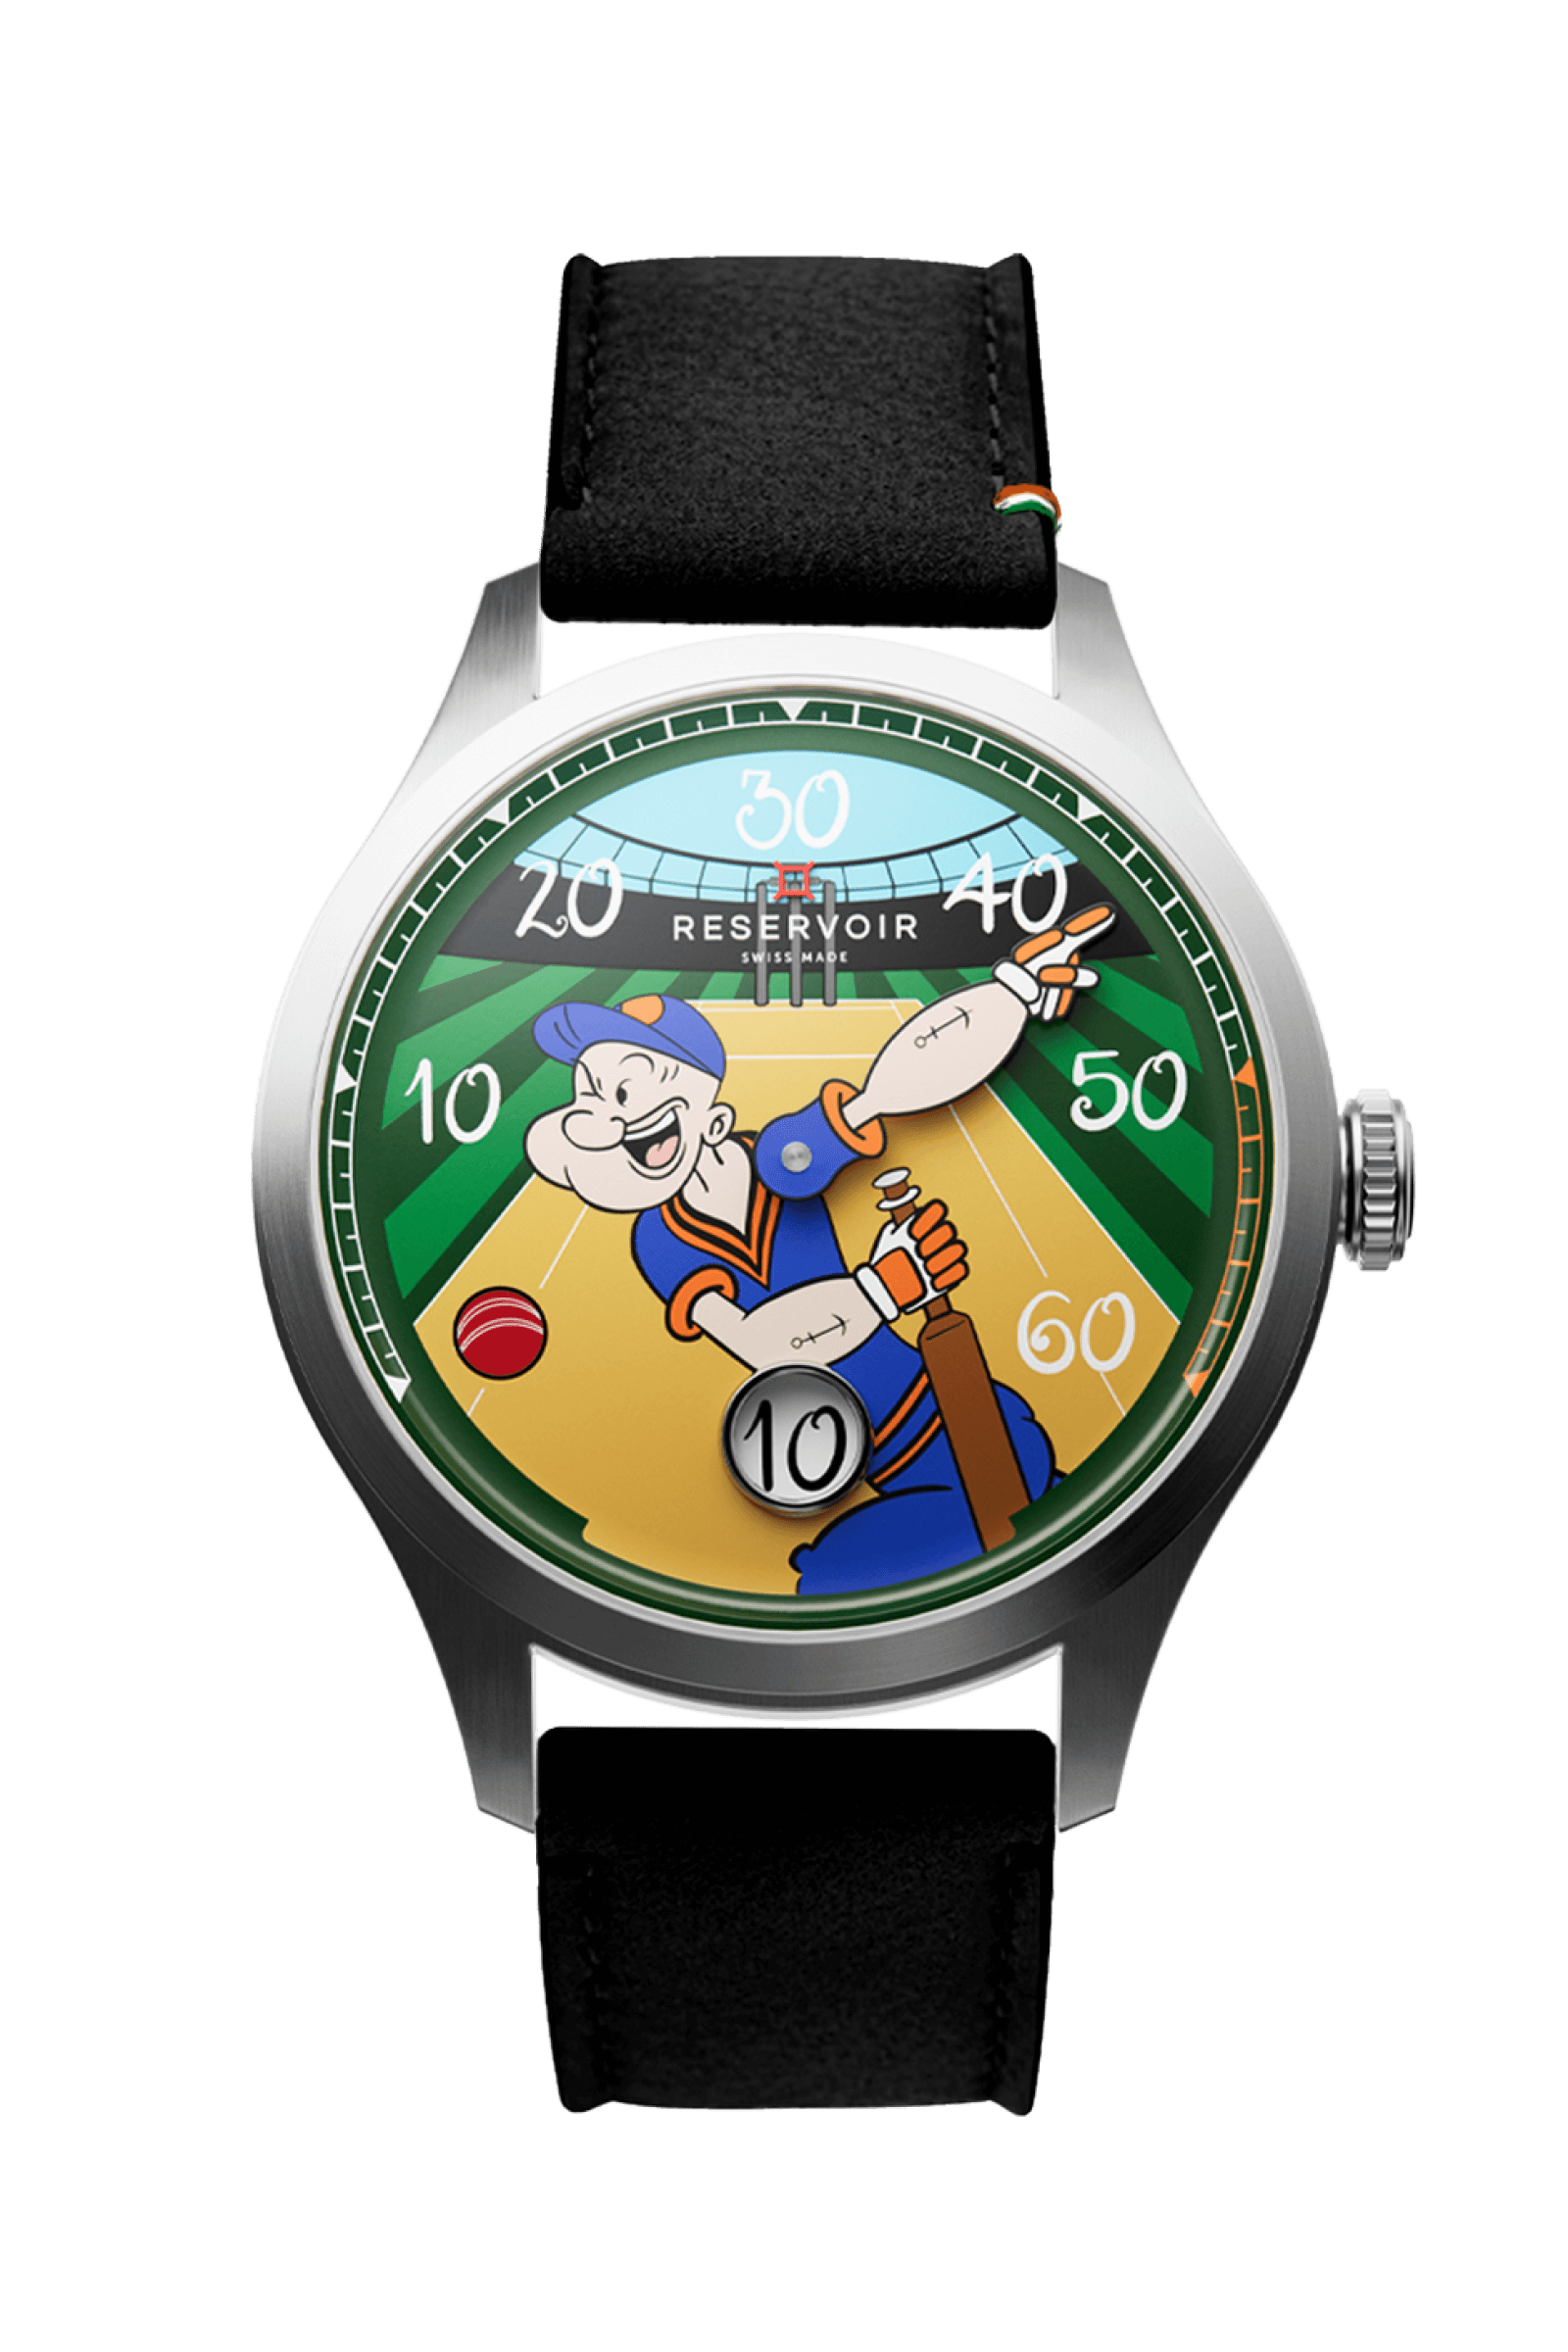 Popeye in Blackish-blue, Light Grey and Olive Green Cricket Comics